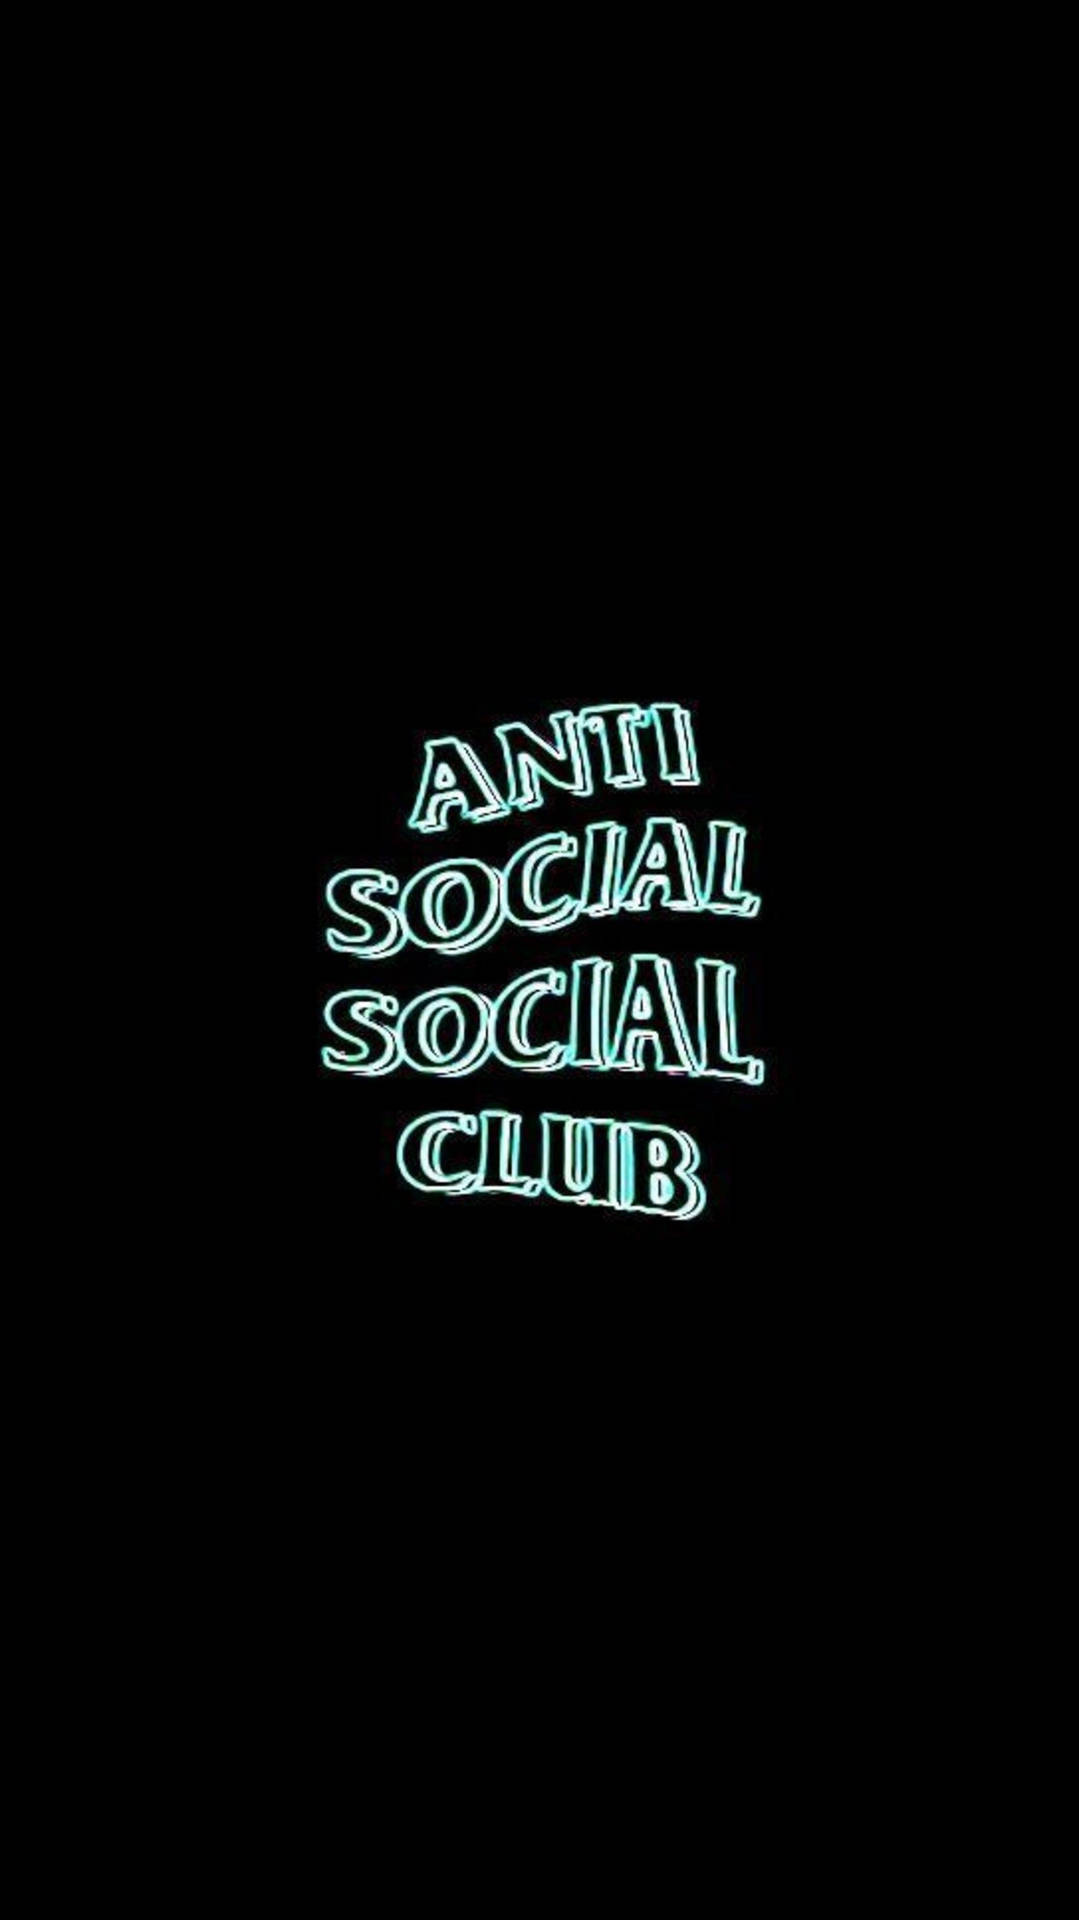 Anti Social Social Club Logo with contrasting black and white colors Wallpaper